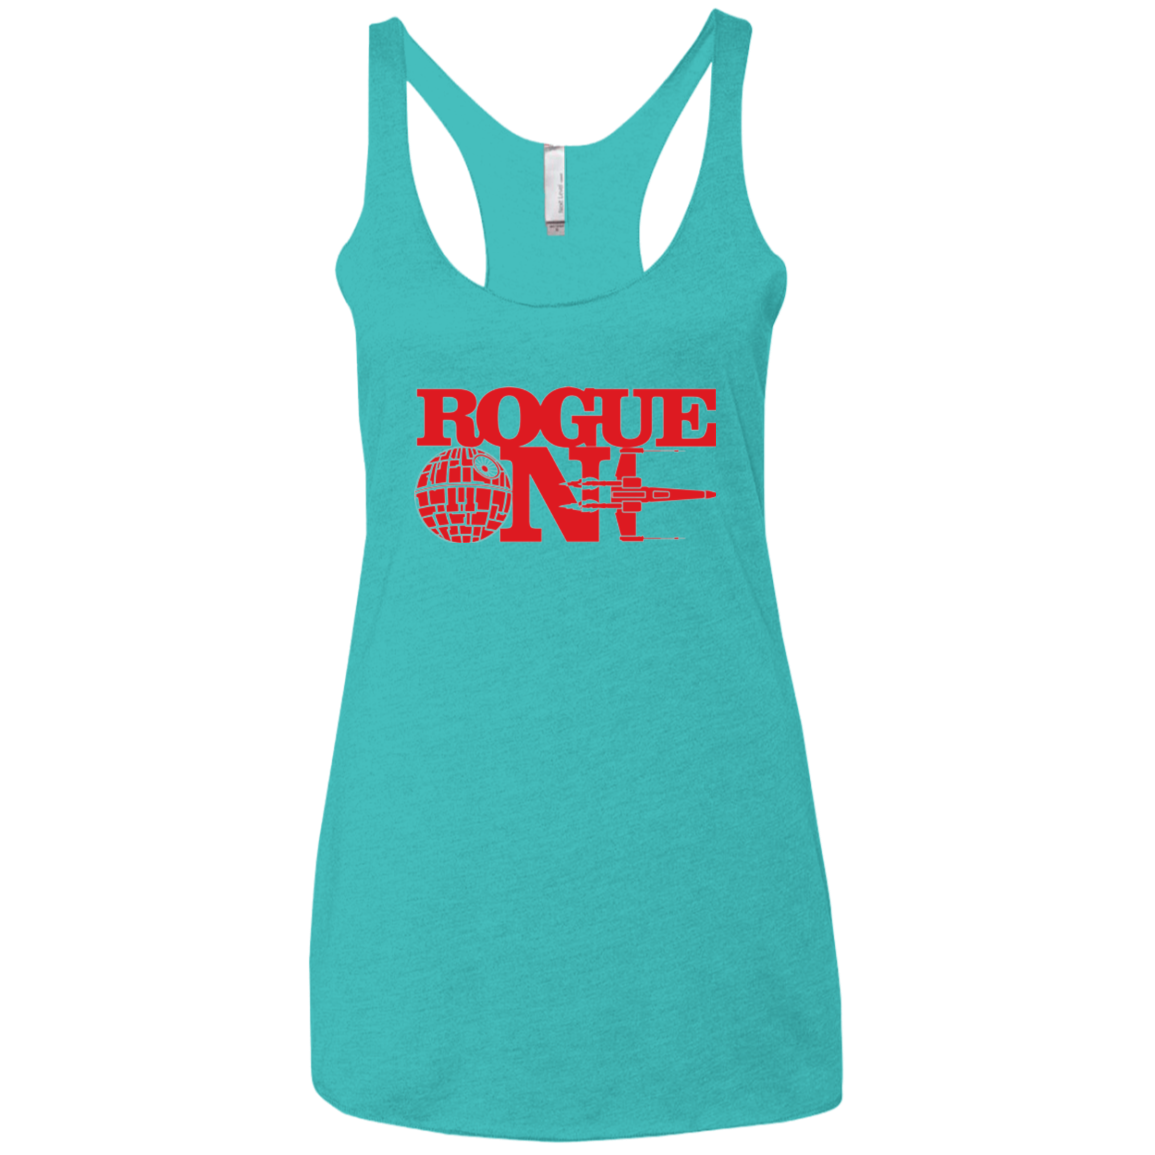 Mission Impossible Women's Triblend Racerback Tank